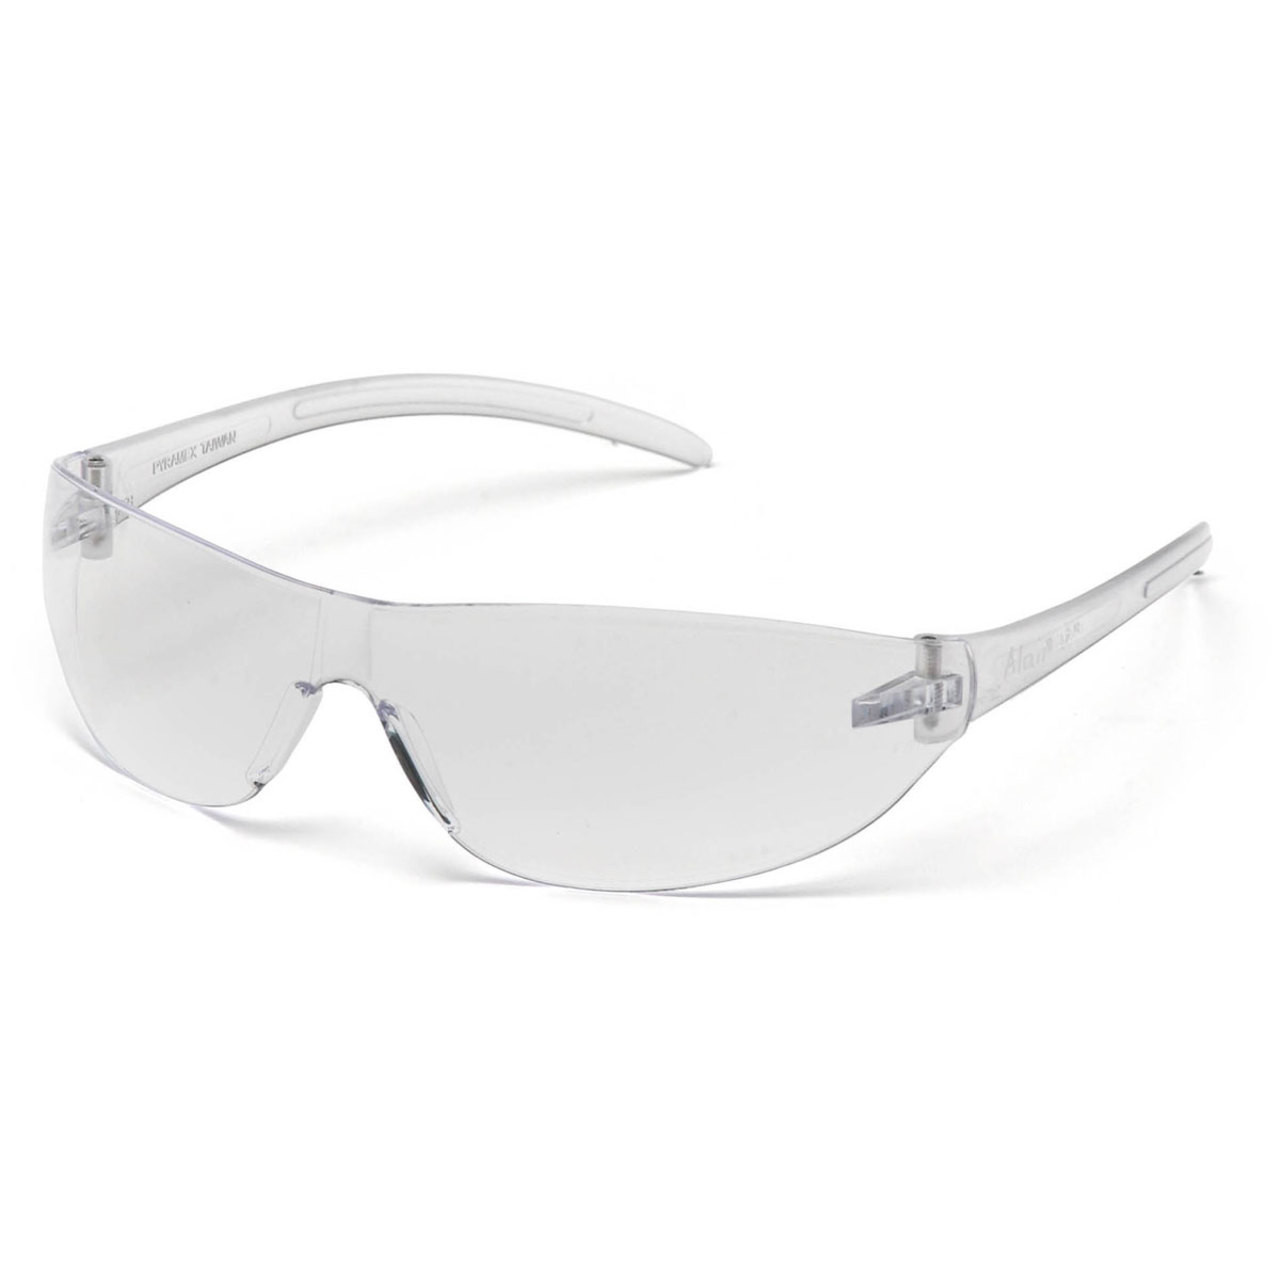 Pyramex Alair Safety Glasses Clear Lens Clear Frame